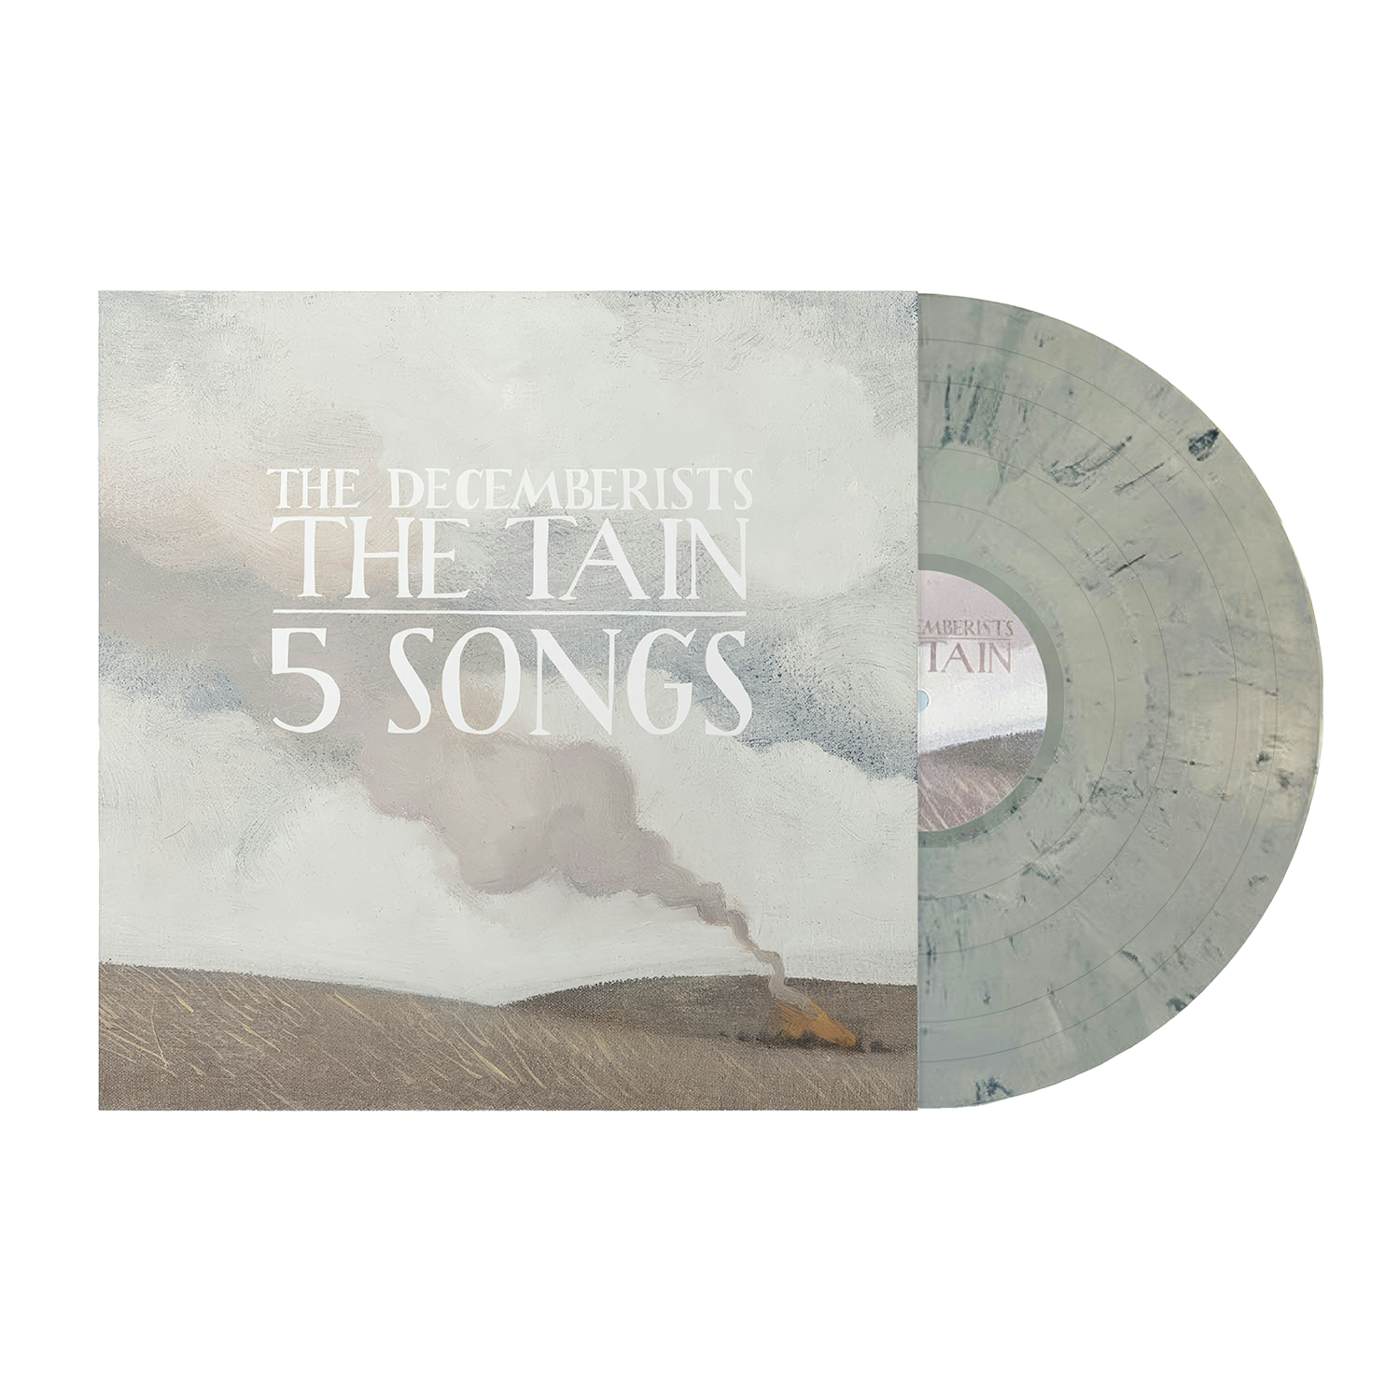 The Decemberists The Tain b/w 5 Songs Exclusive Galaxy Swirl Vinyl